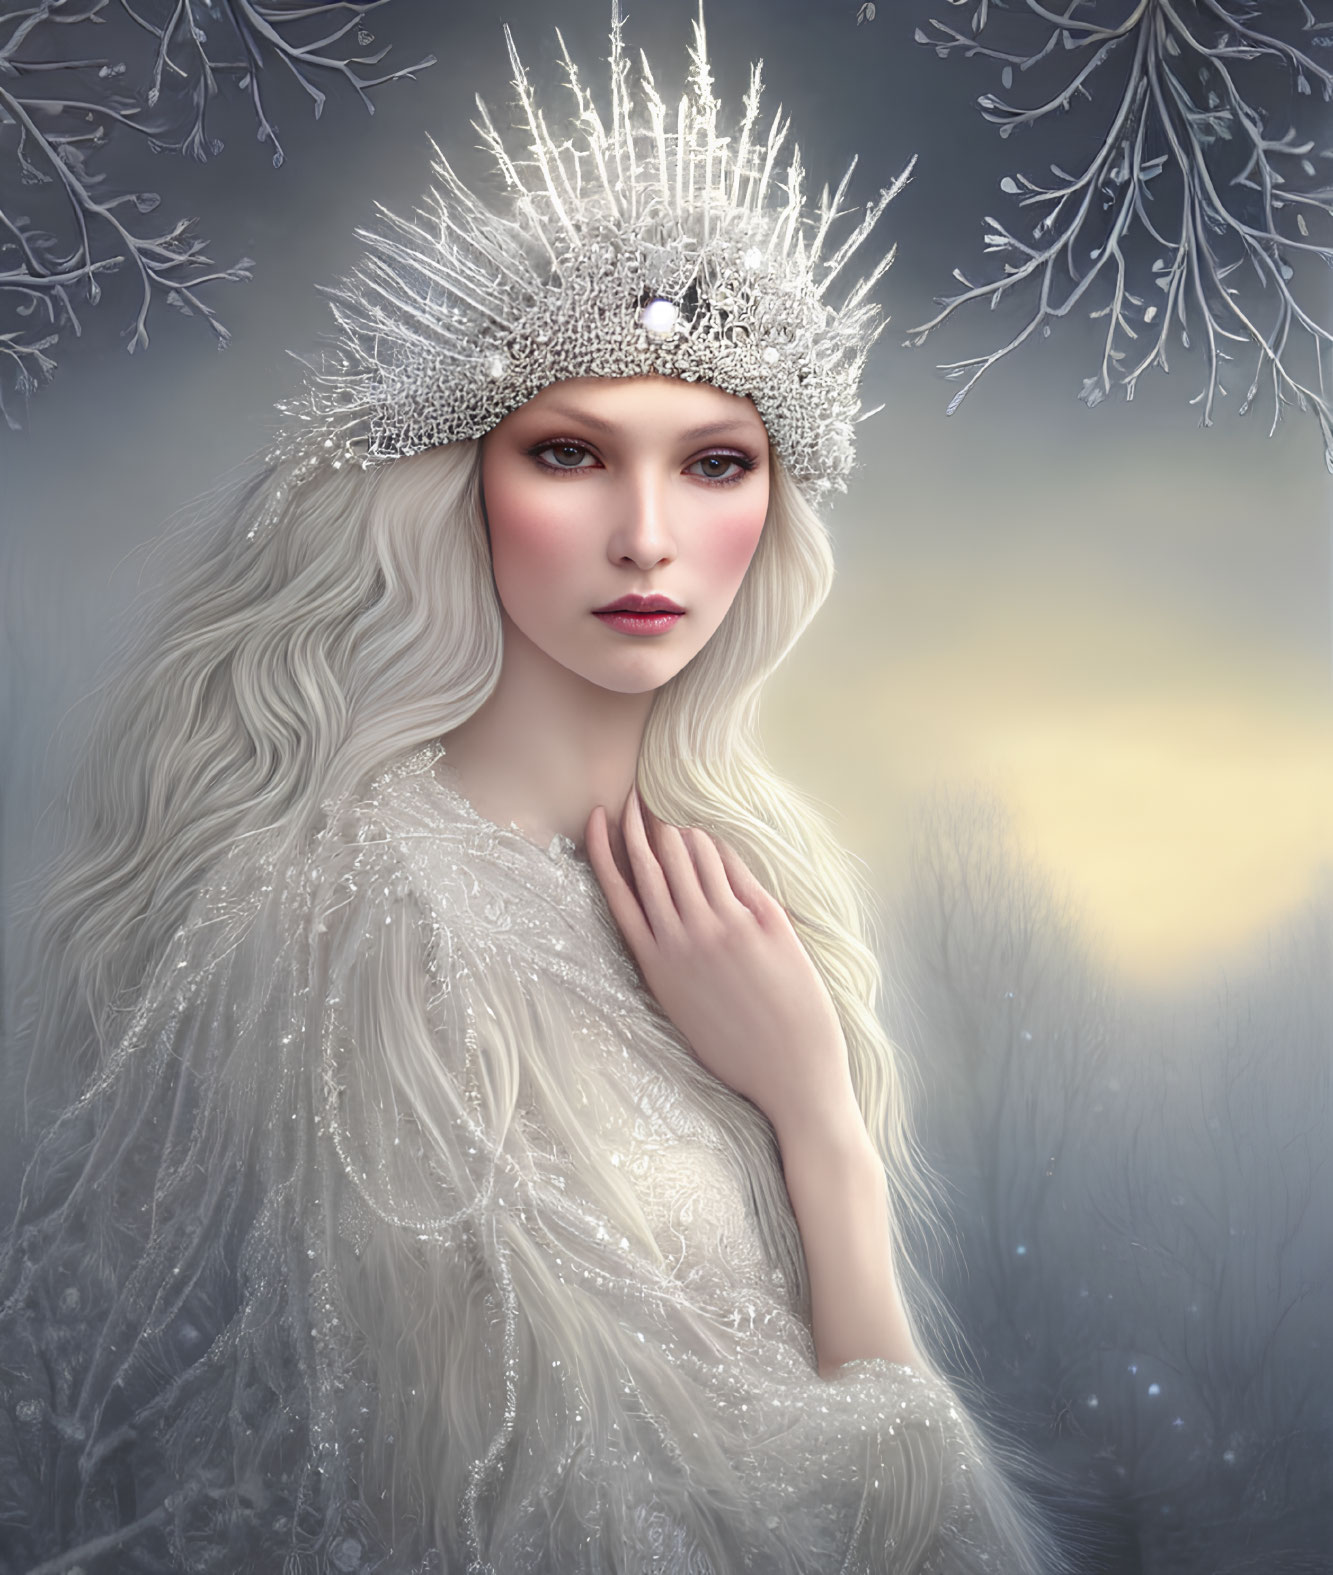 Portrait of Woman with White Hair and Crystal Crown in Winter Setting